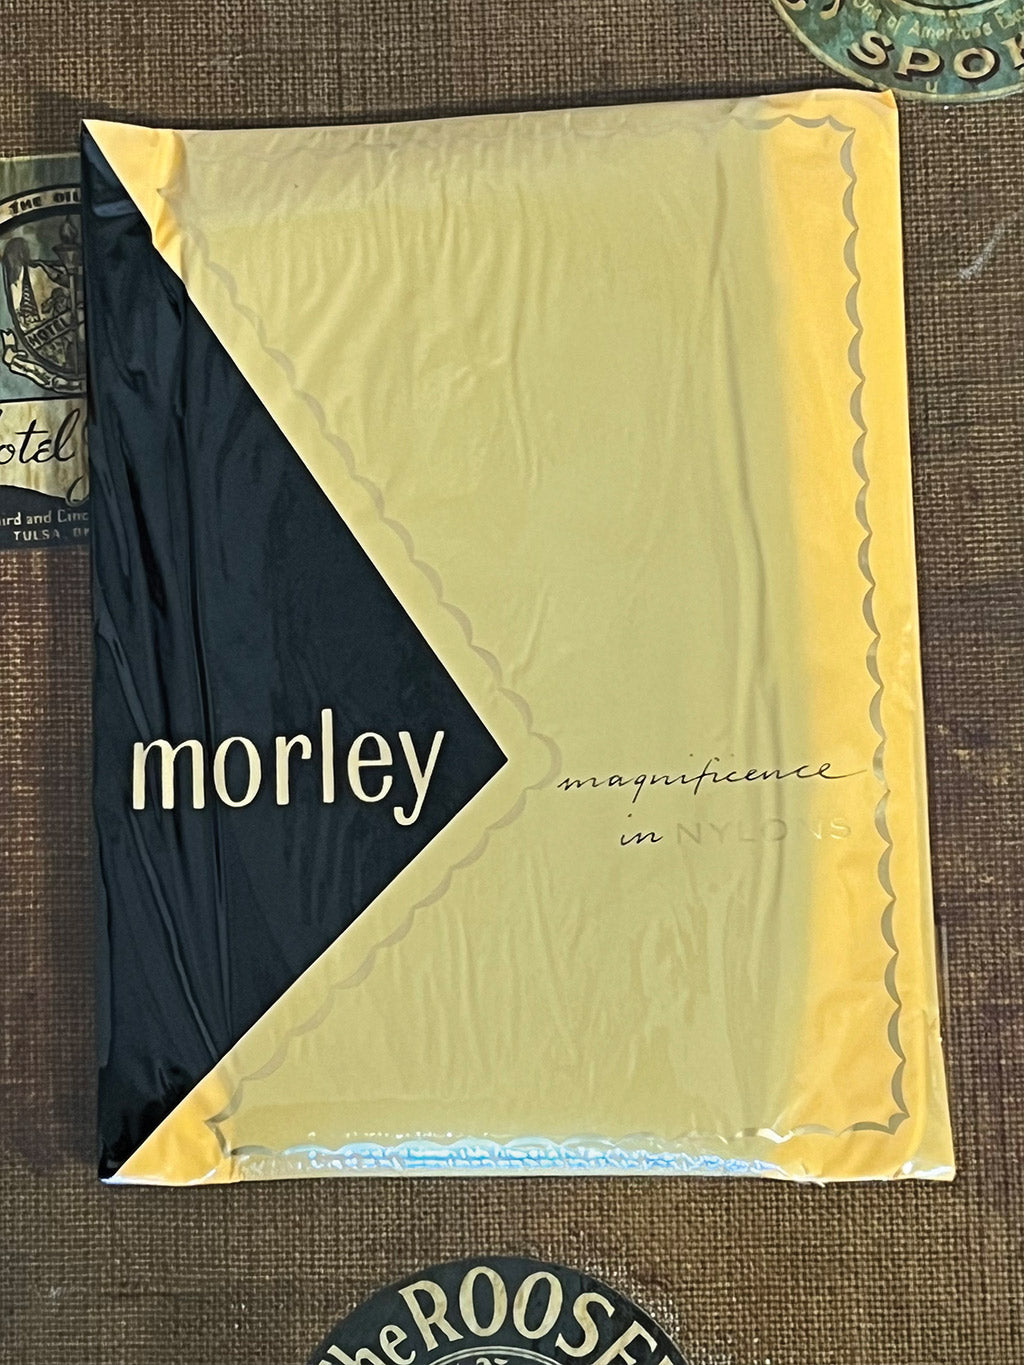 Vintage Morley Fully Fashioned Stockings Boxed, front